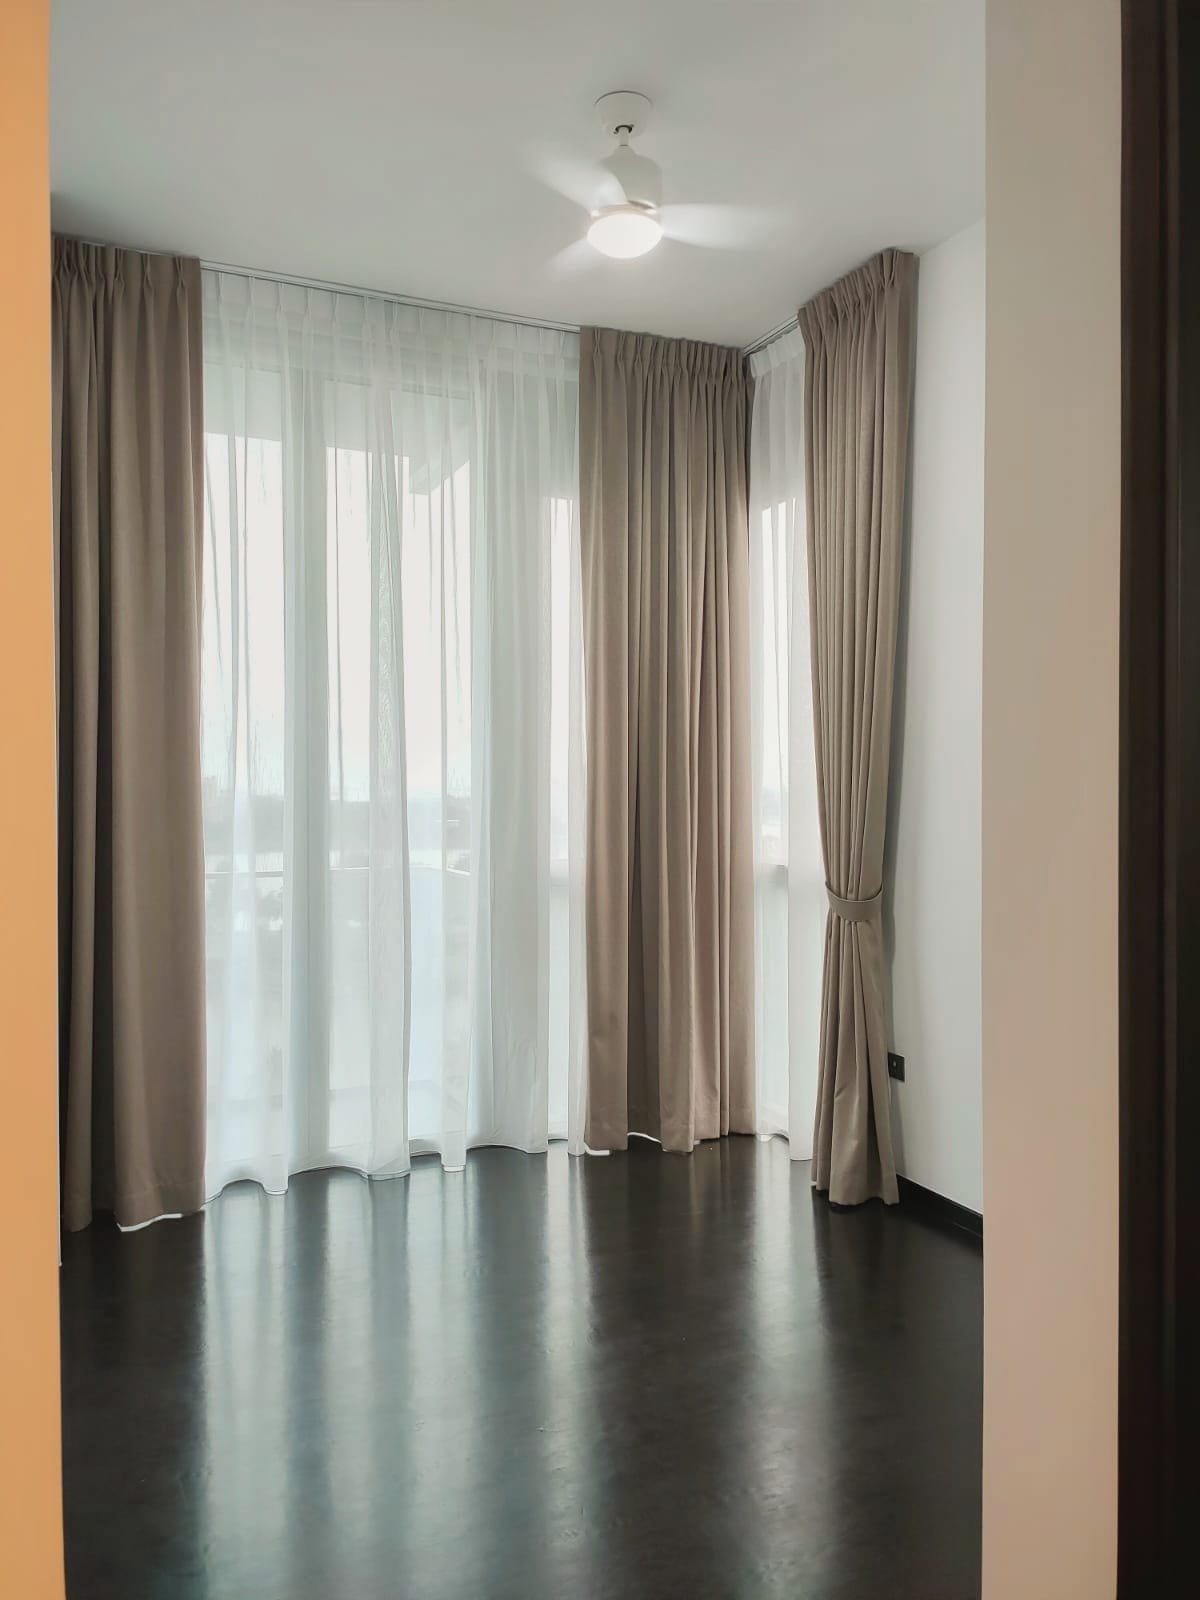 This is a Picture for Day and night curtain for Singapore condo, Master room, L shape window, day and night curtain, Kallang Riverside